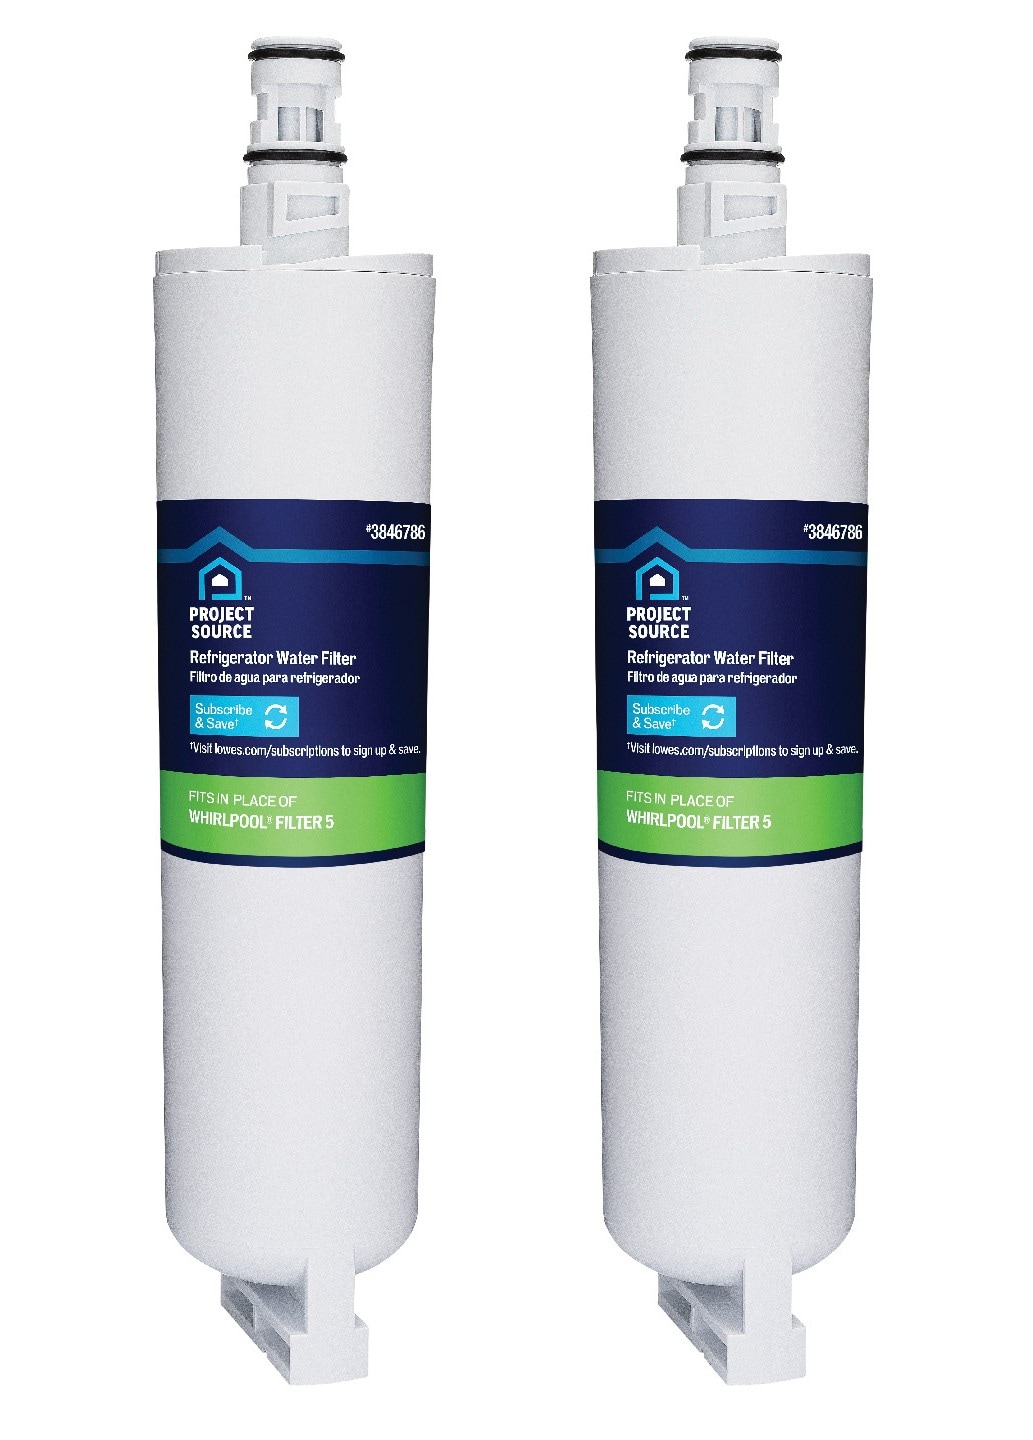 How To: Refrigerator Water Filter 